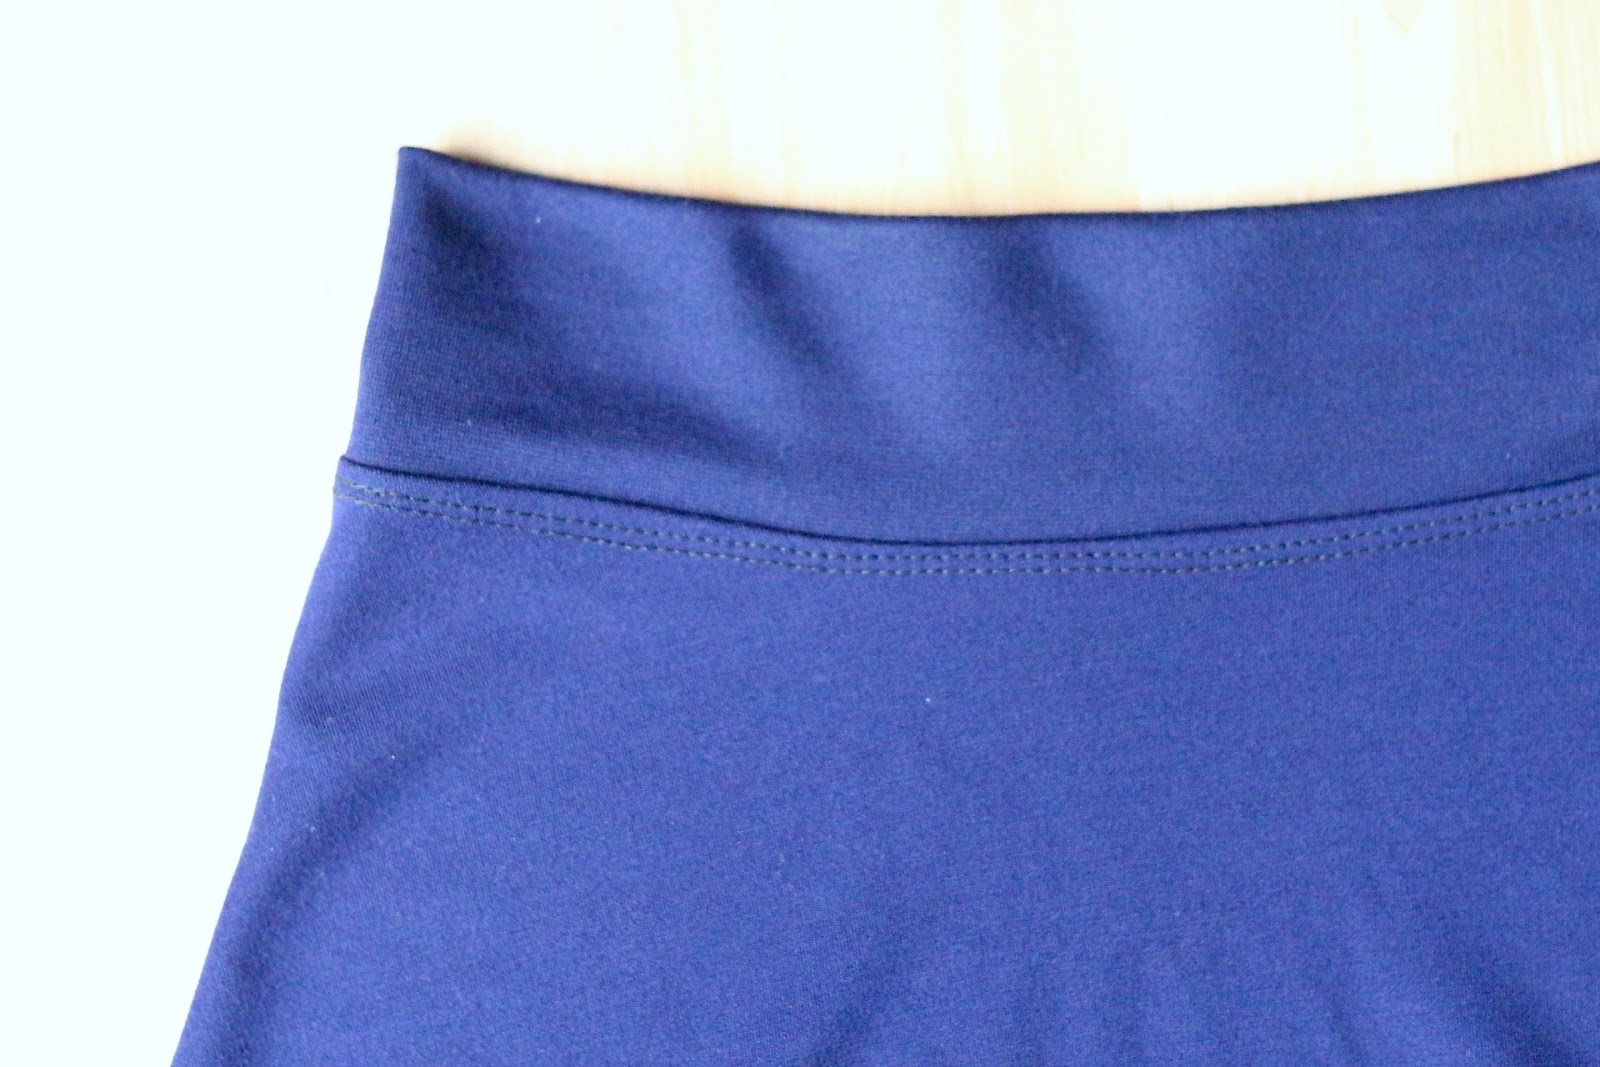 Zaaberry: iCandy Handmade's Everyday Skirt // Transitioning to Fall